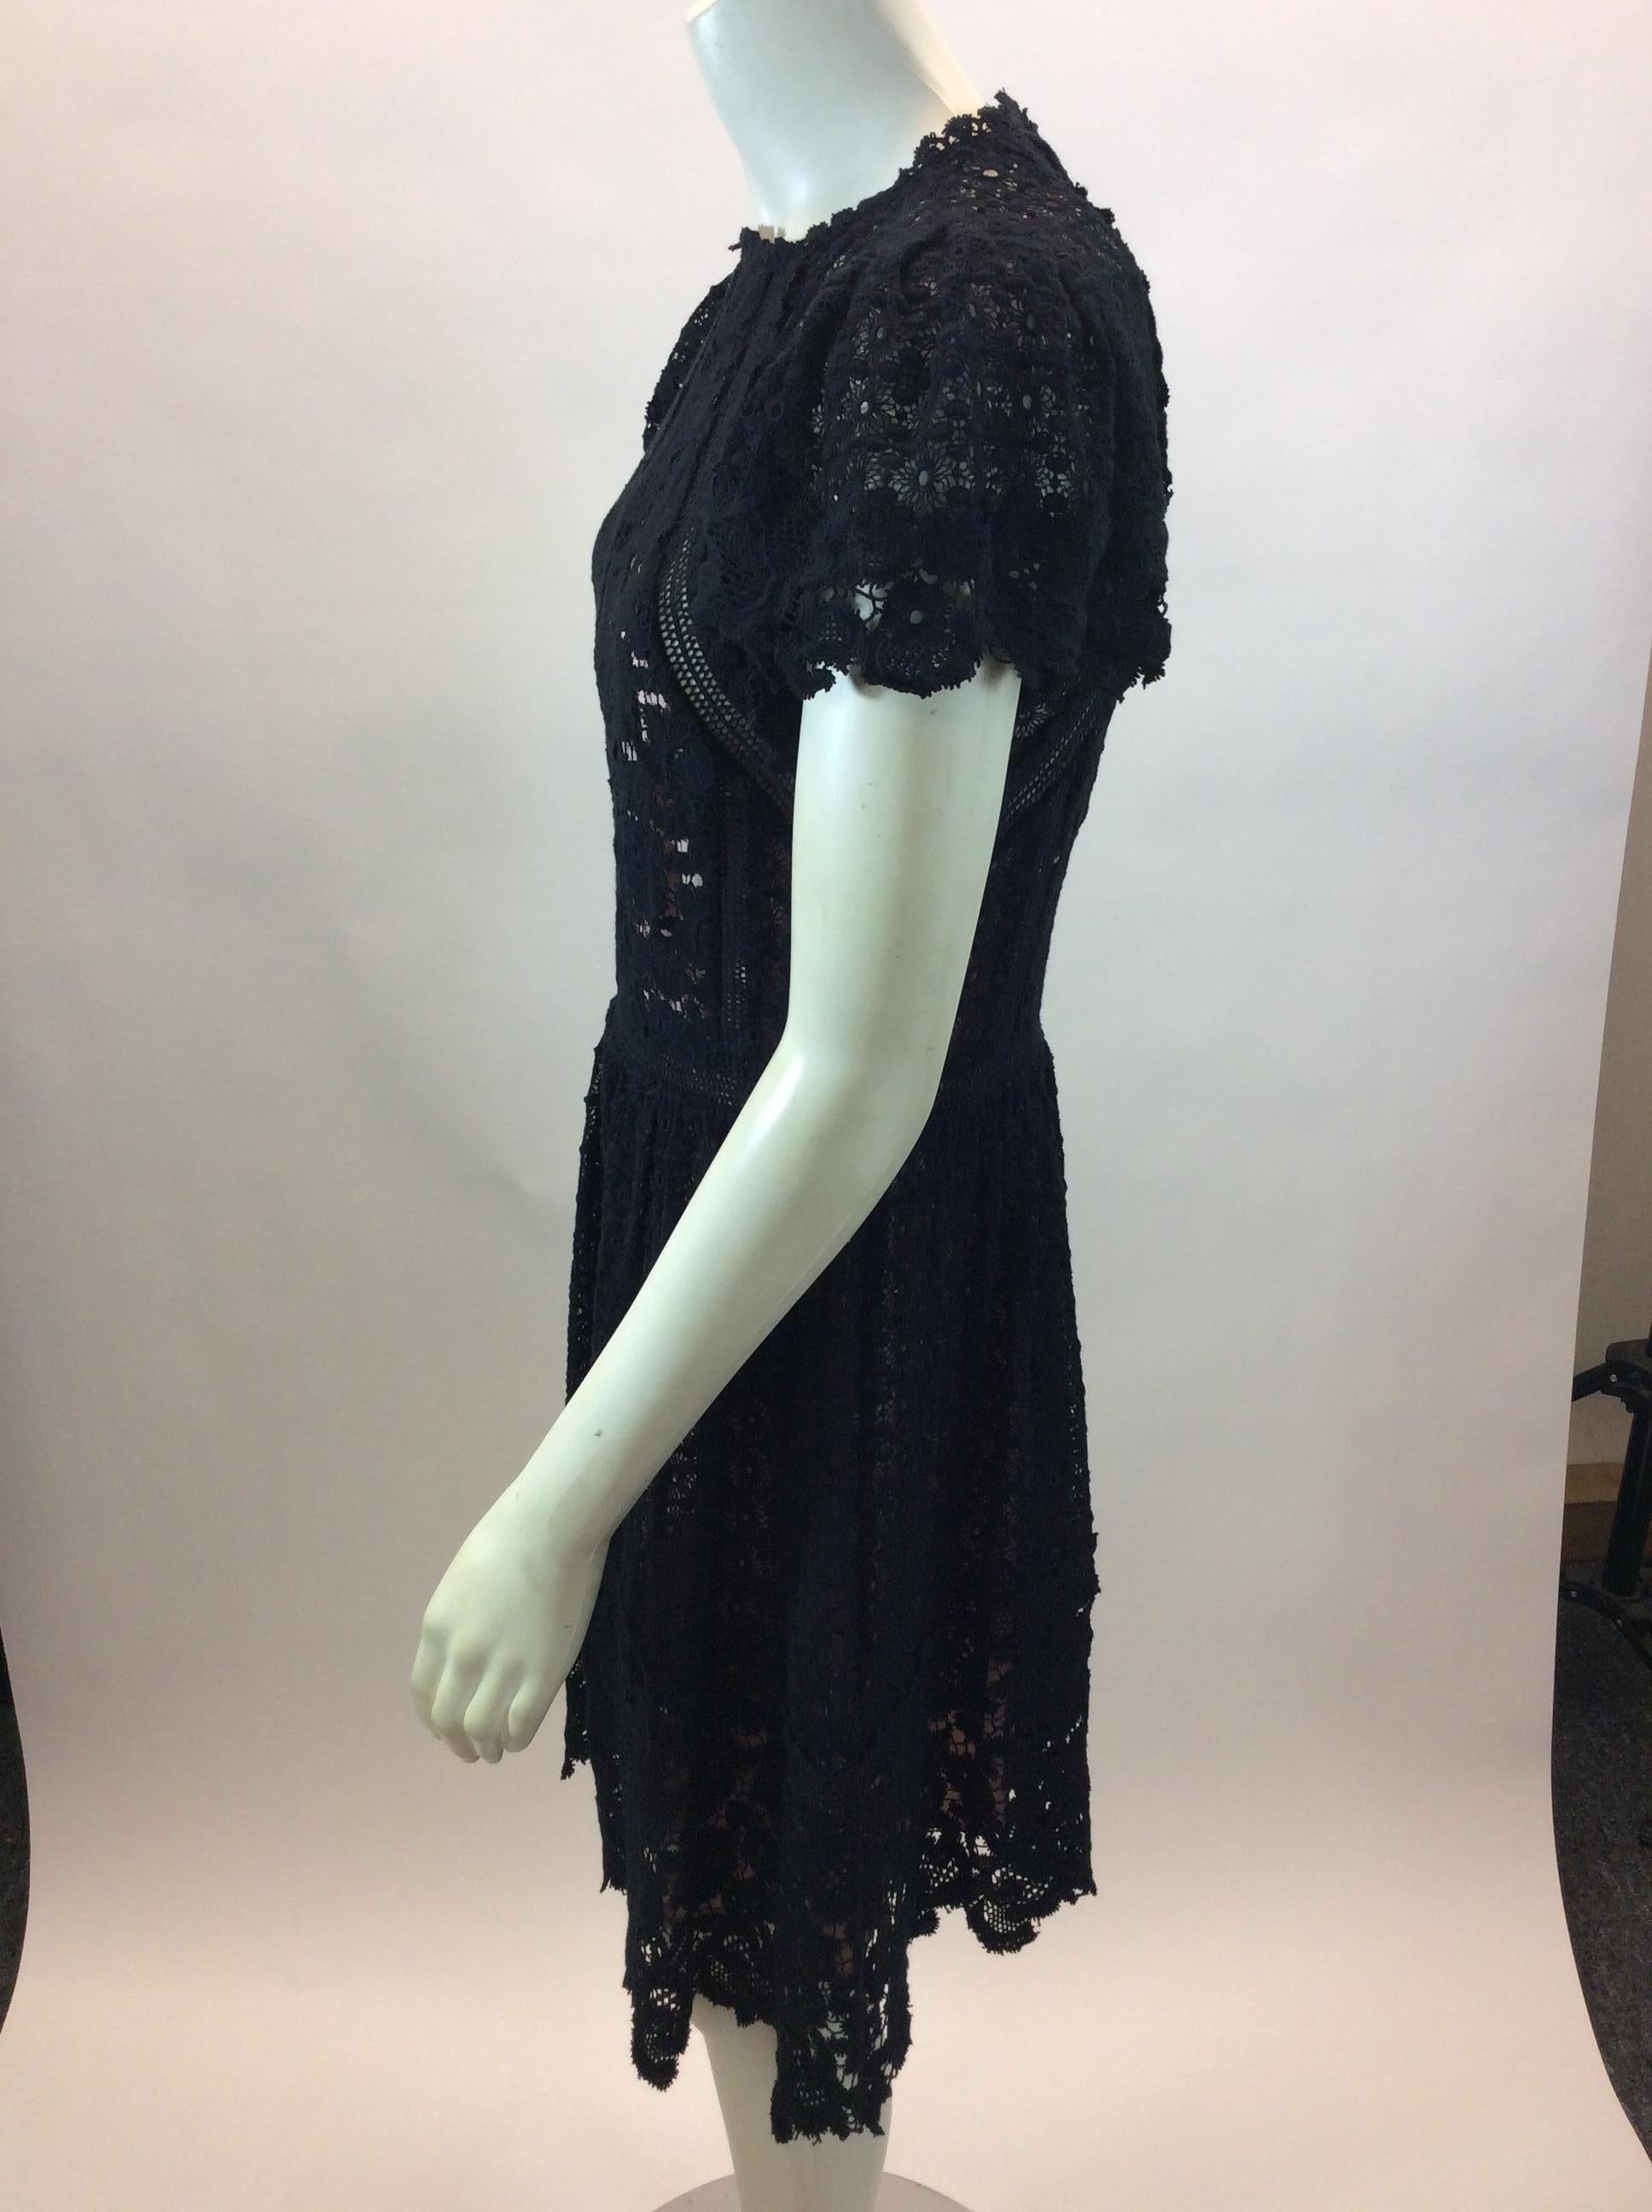 Rebecca Taylor Black Lace Dress NWT
$395
Made in China
100% Cotton
Size 4
Length 36